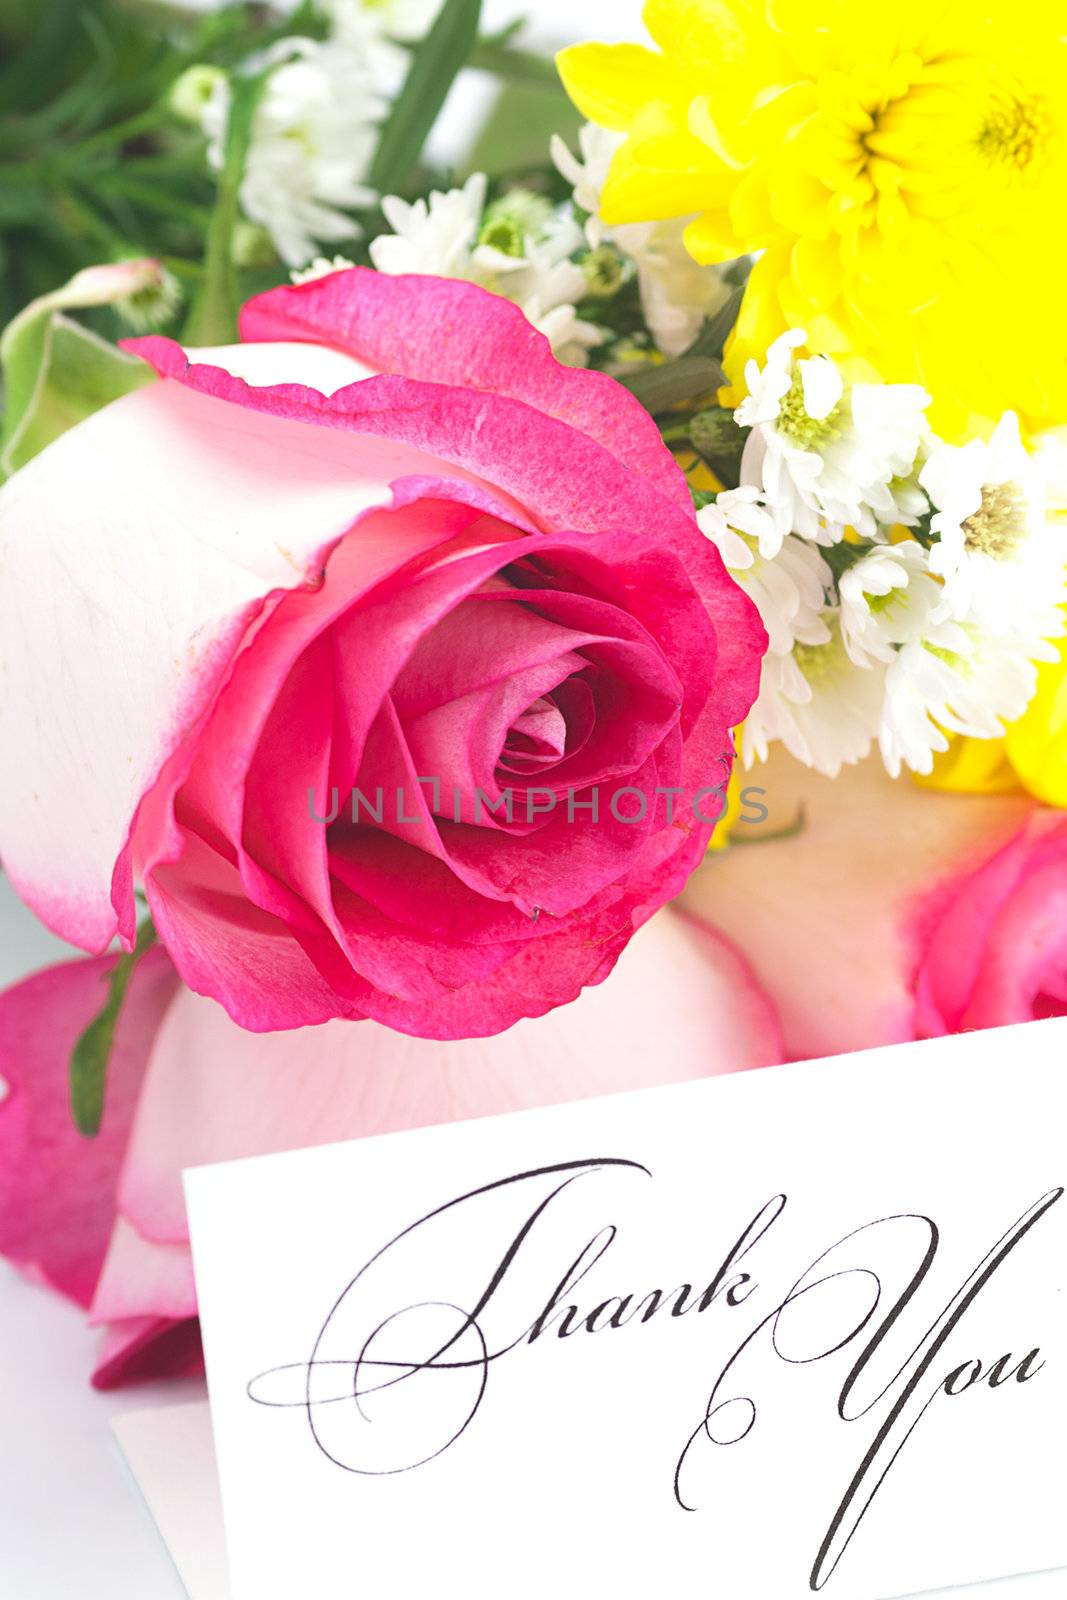 roses, chamomile, chrysanthemums and a card with the words thank you isolated on white